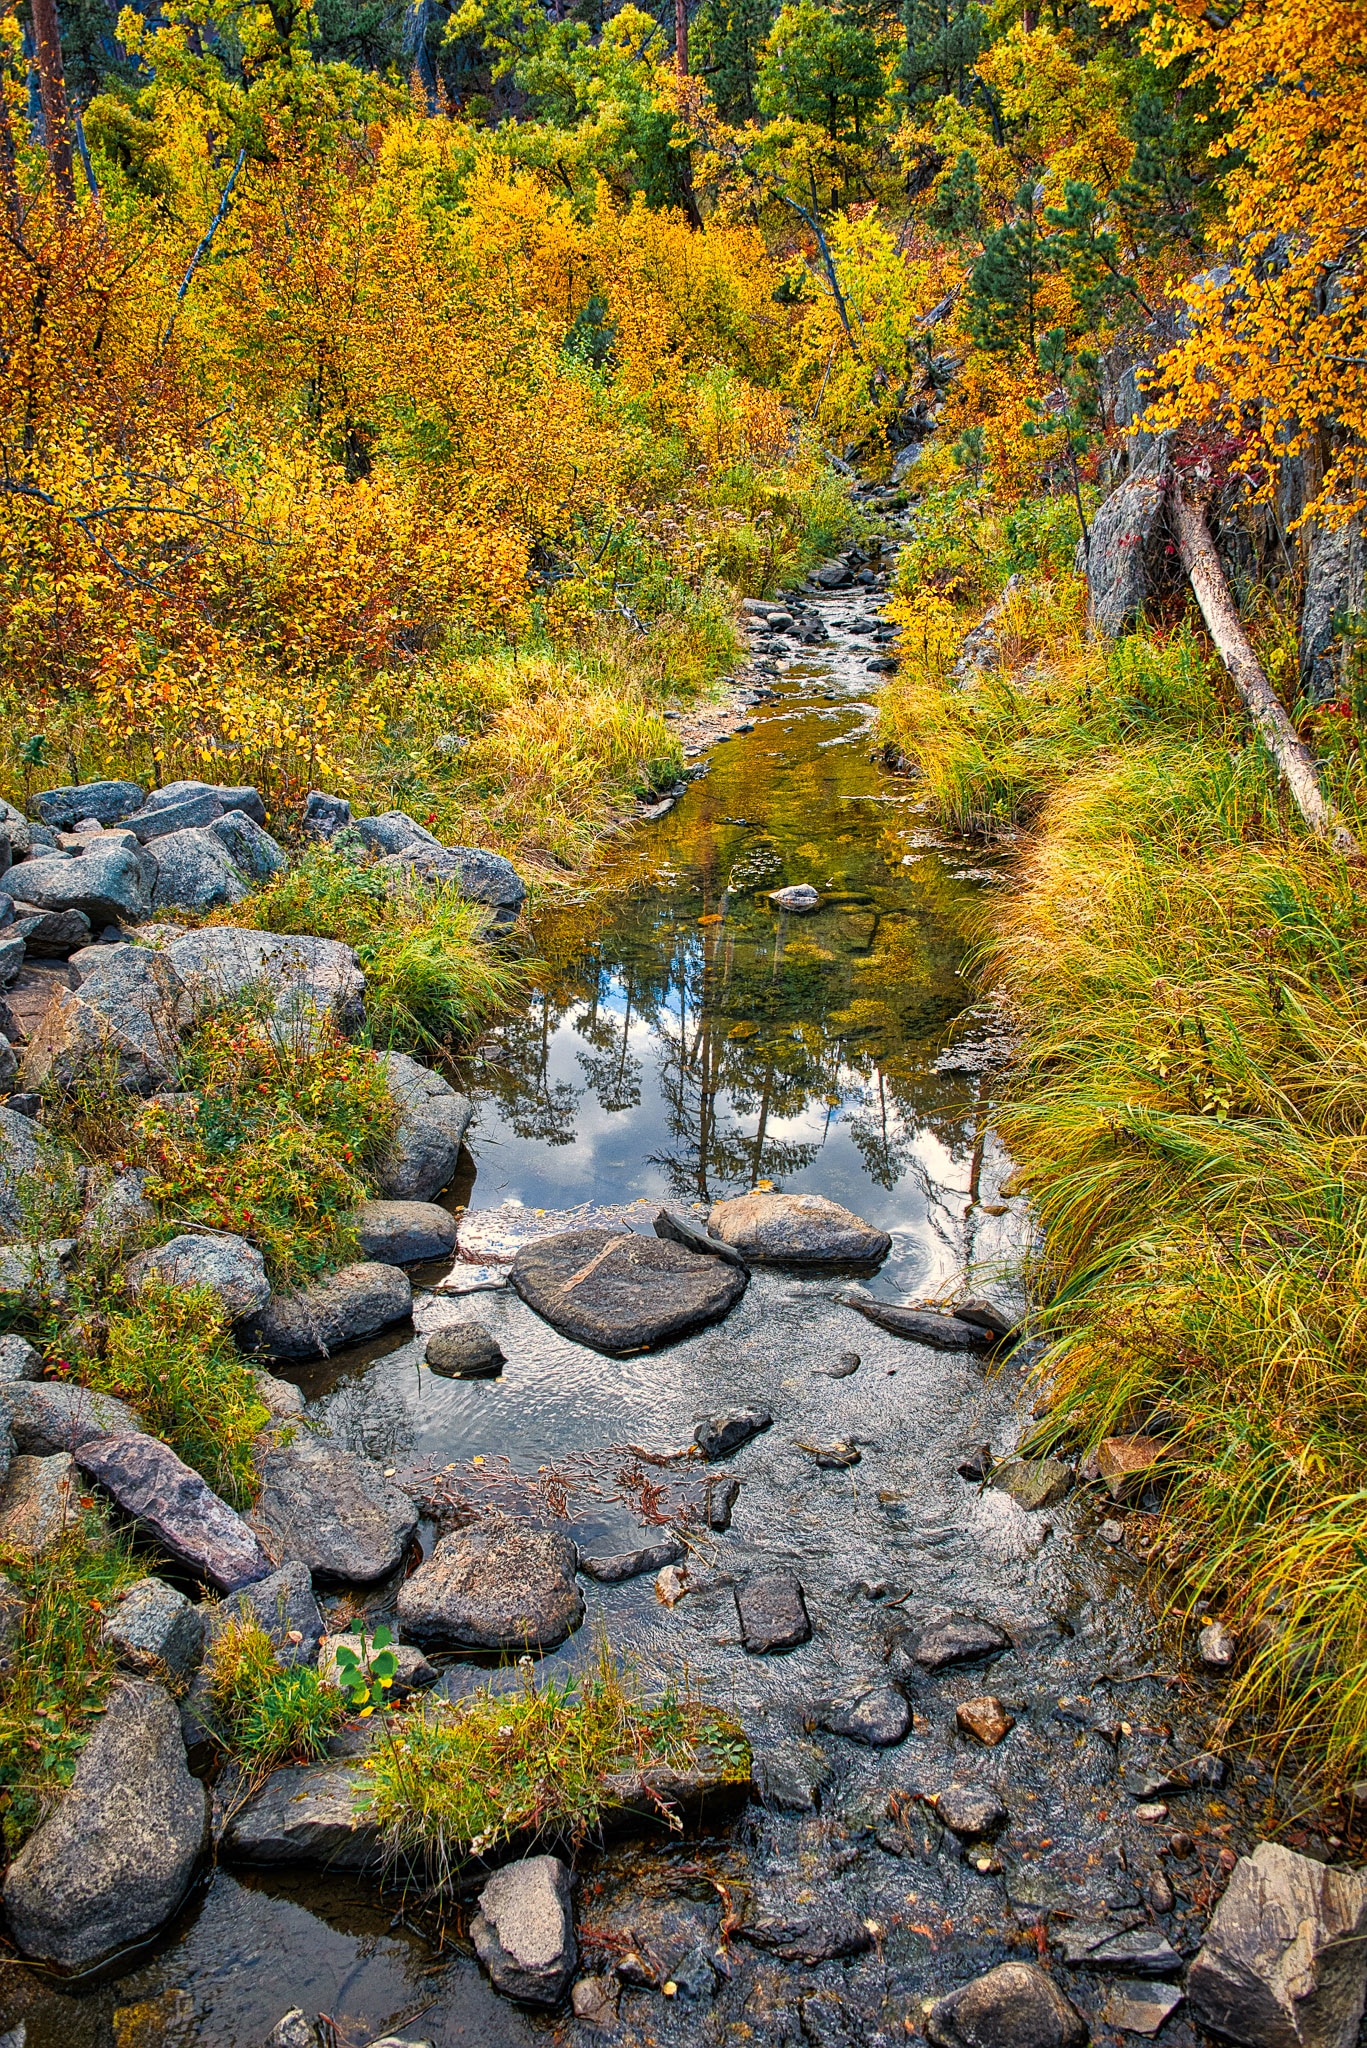 Autumn-colored trees and green pine trees are reflected in a stream along the Iron Mountain Highway in Black Hills National Forest in South Dakota.